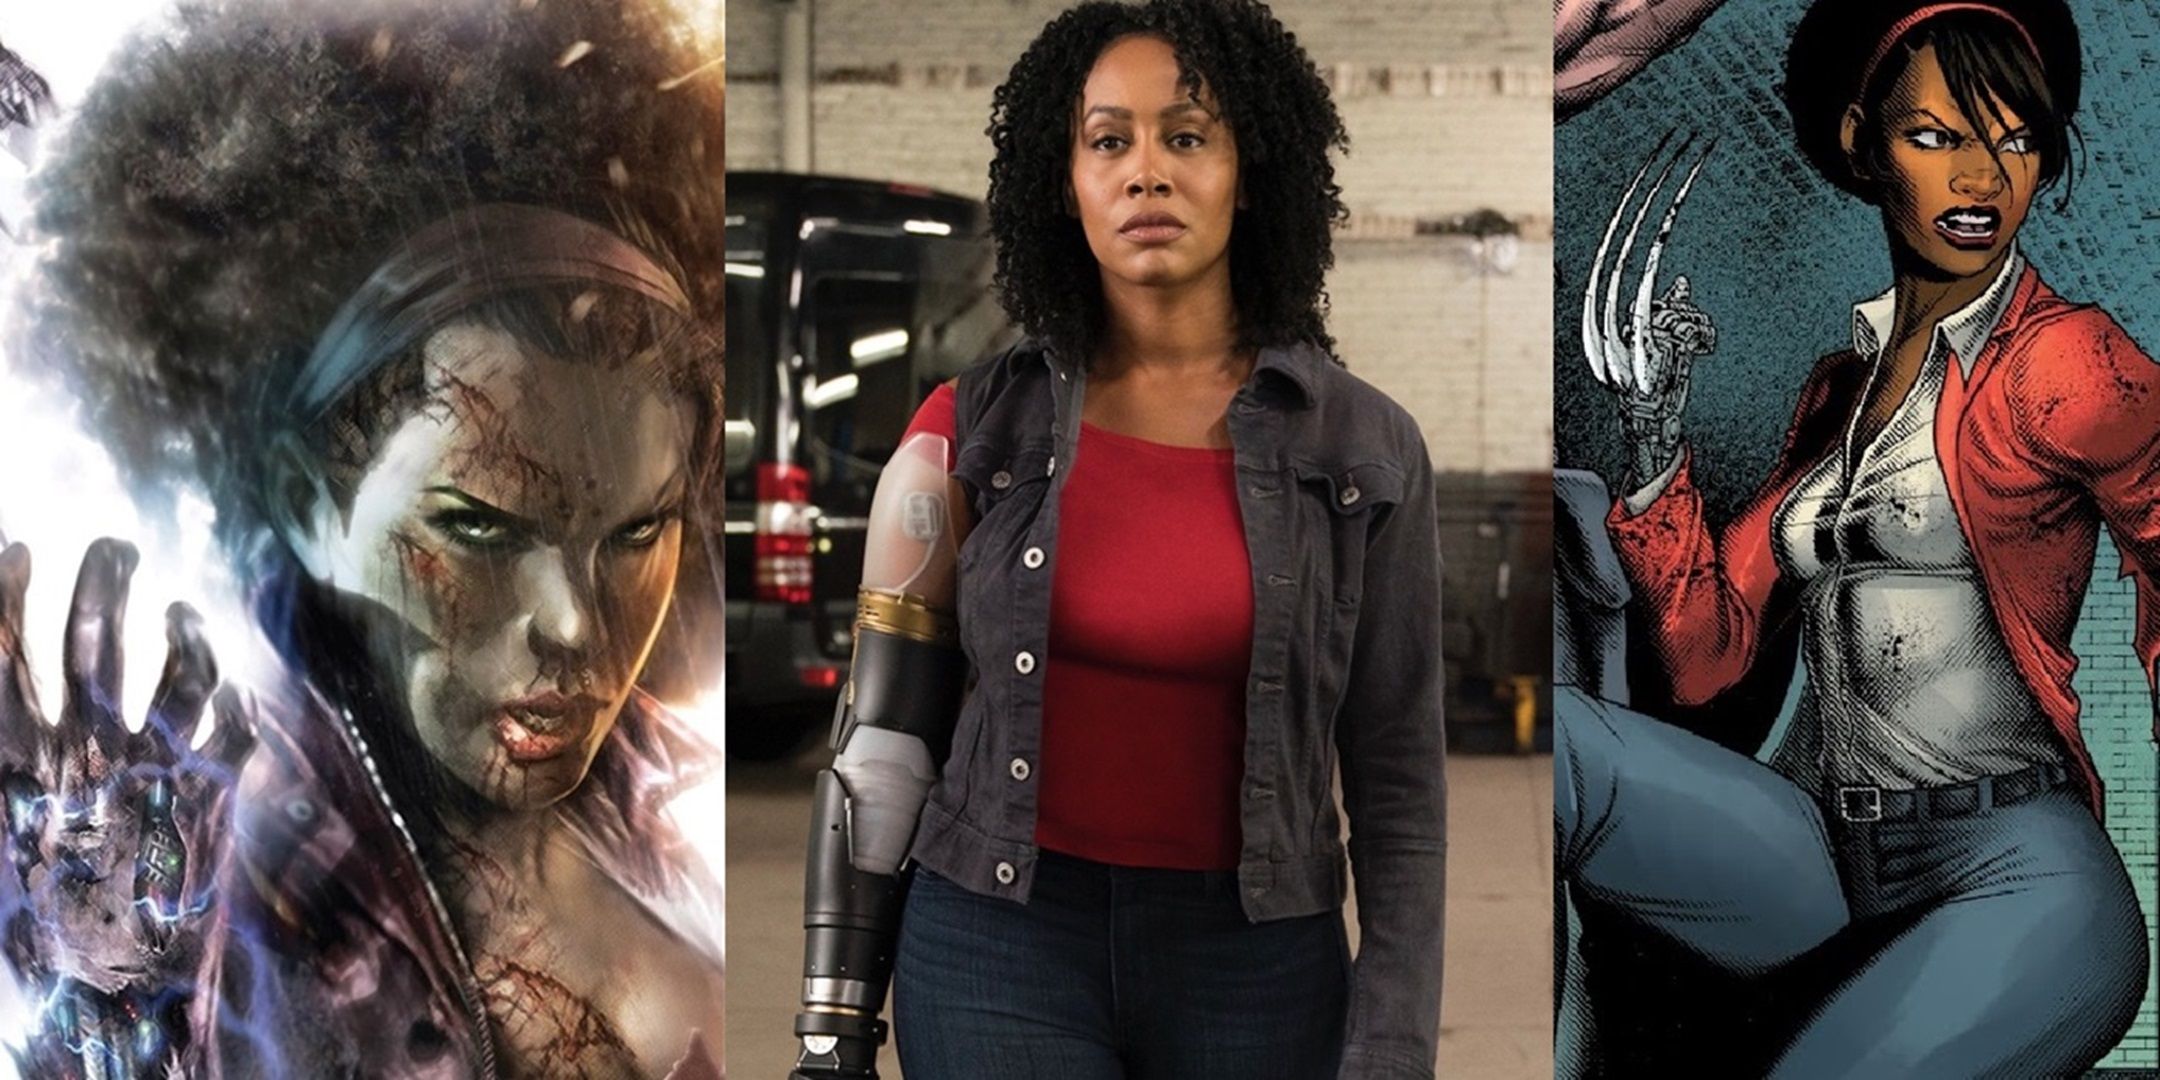 Misty Knight and her bionic arms